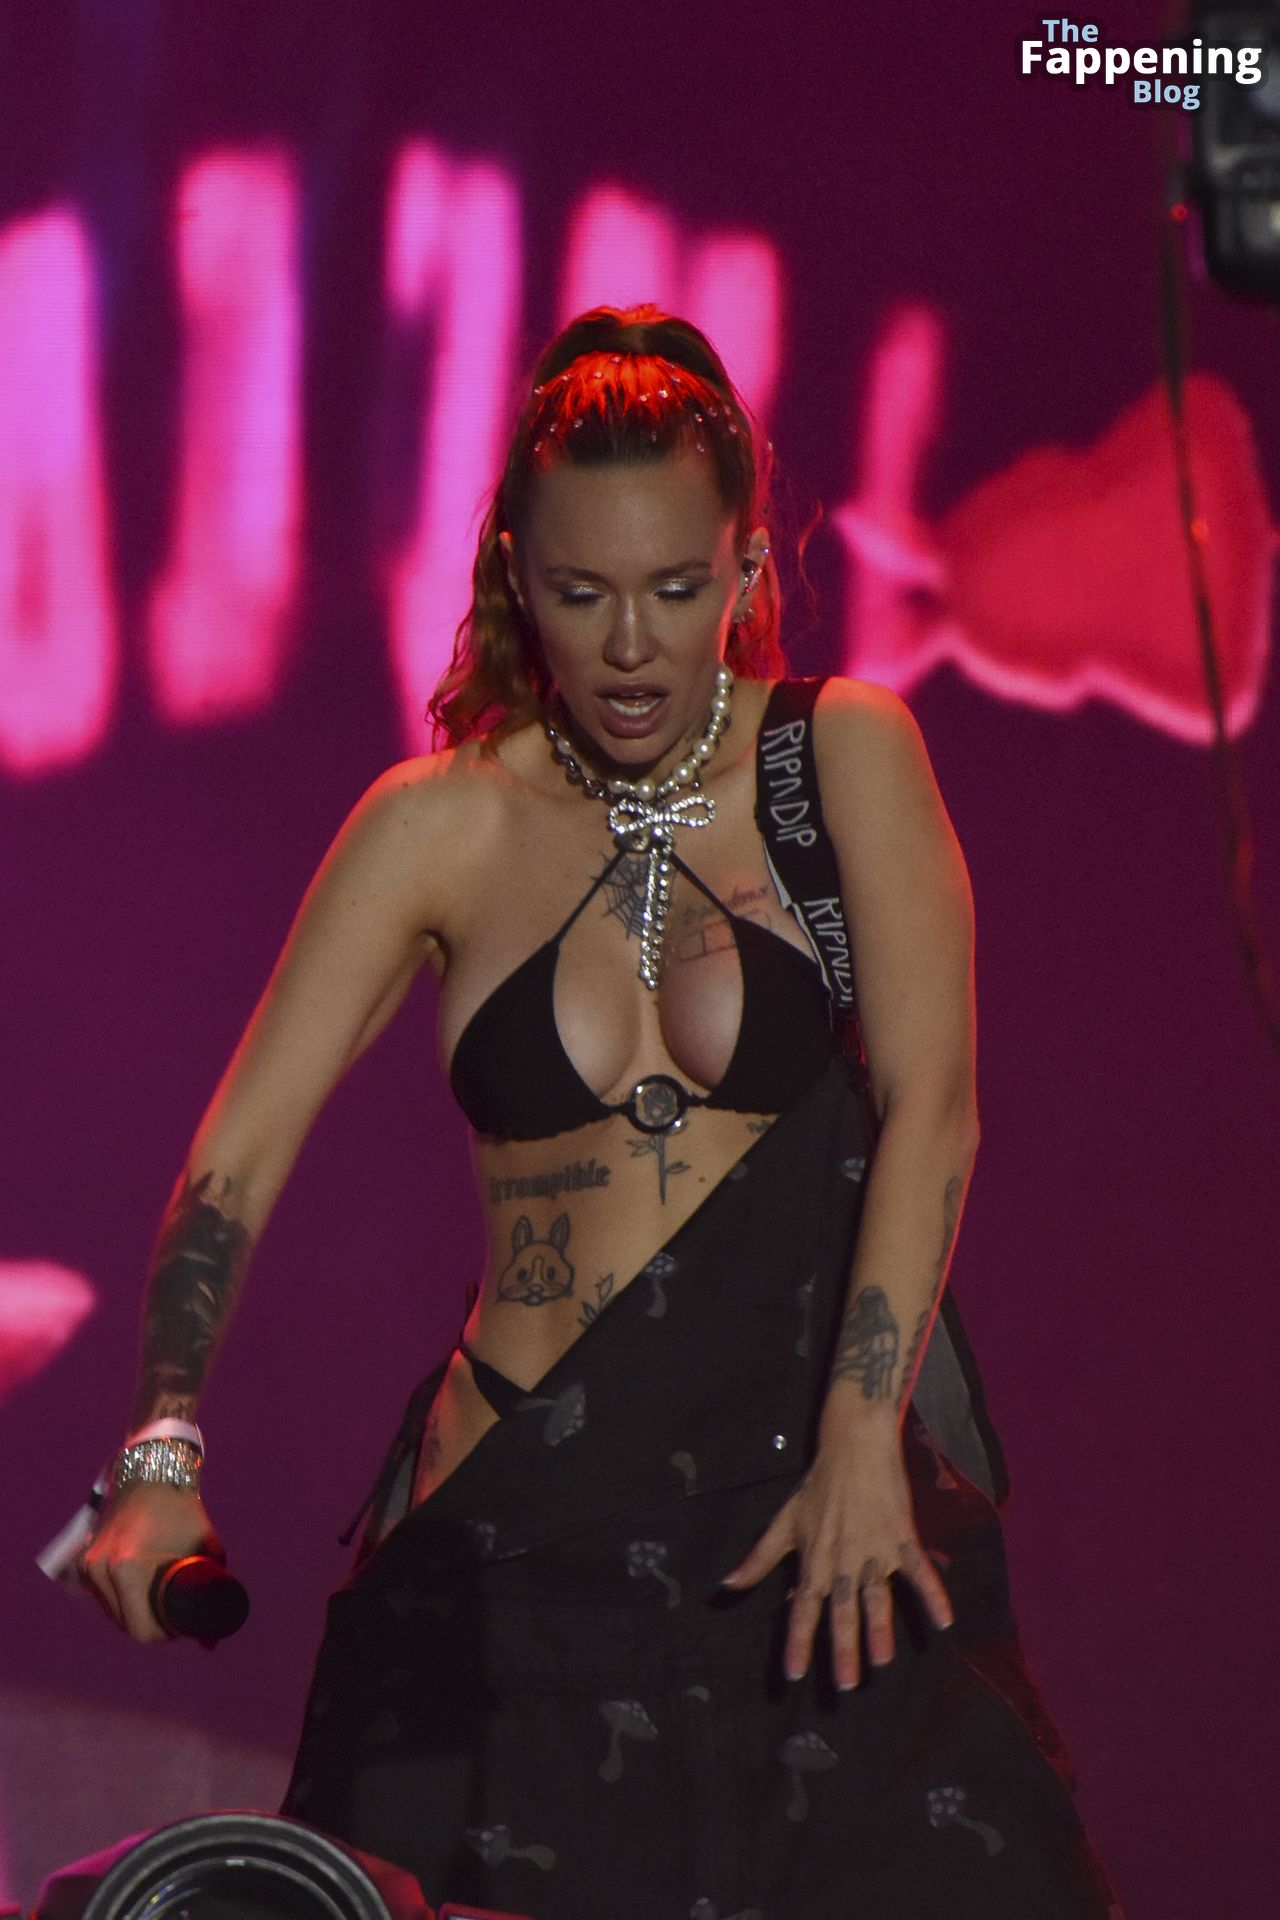 La Joaqui Flaunts Her Sexy Tits on Stage at the Coca Cola Flow Fest (11 Photos)